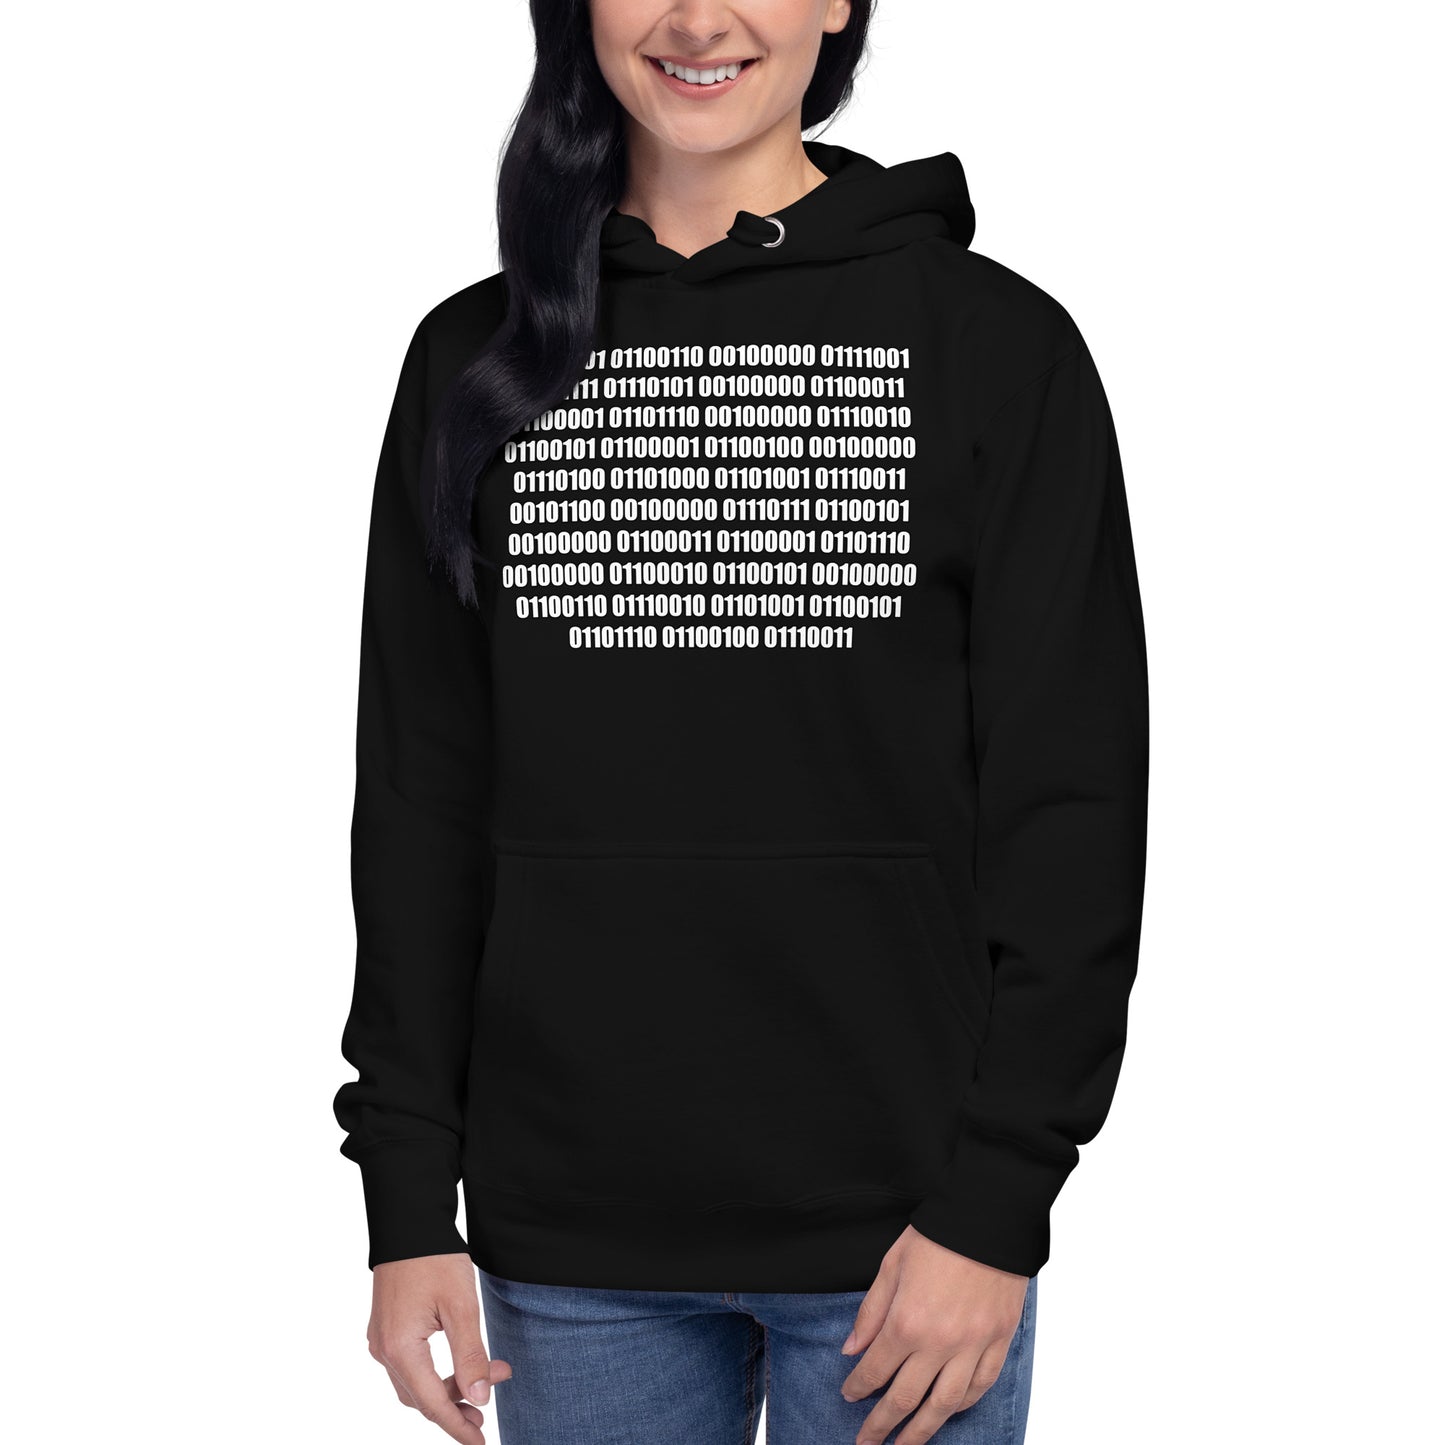 Women with Black hoodie with binaire text "If you can read this"